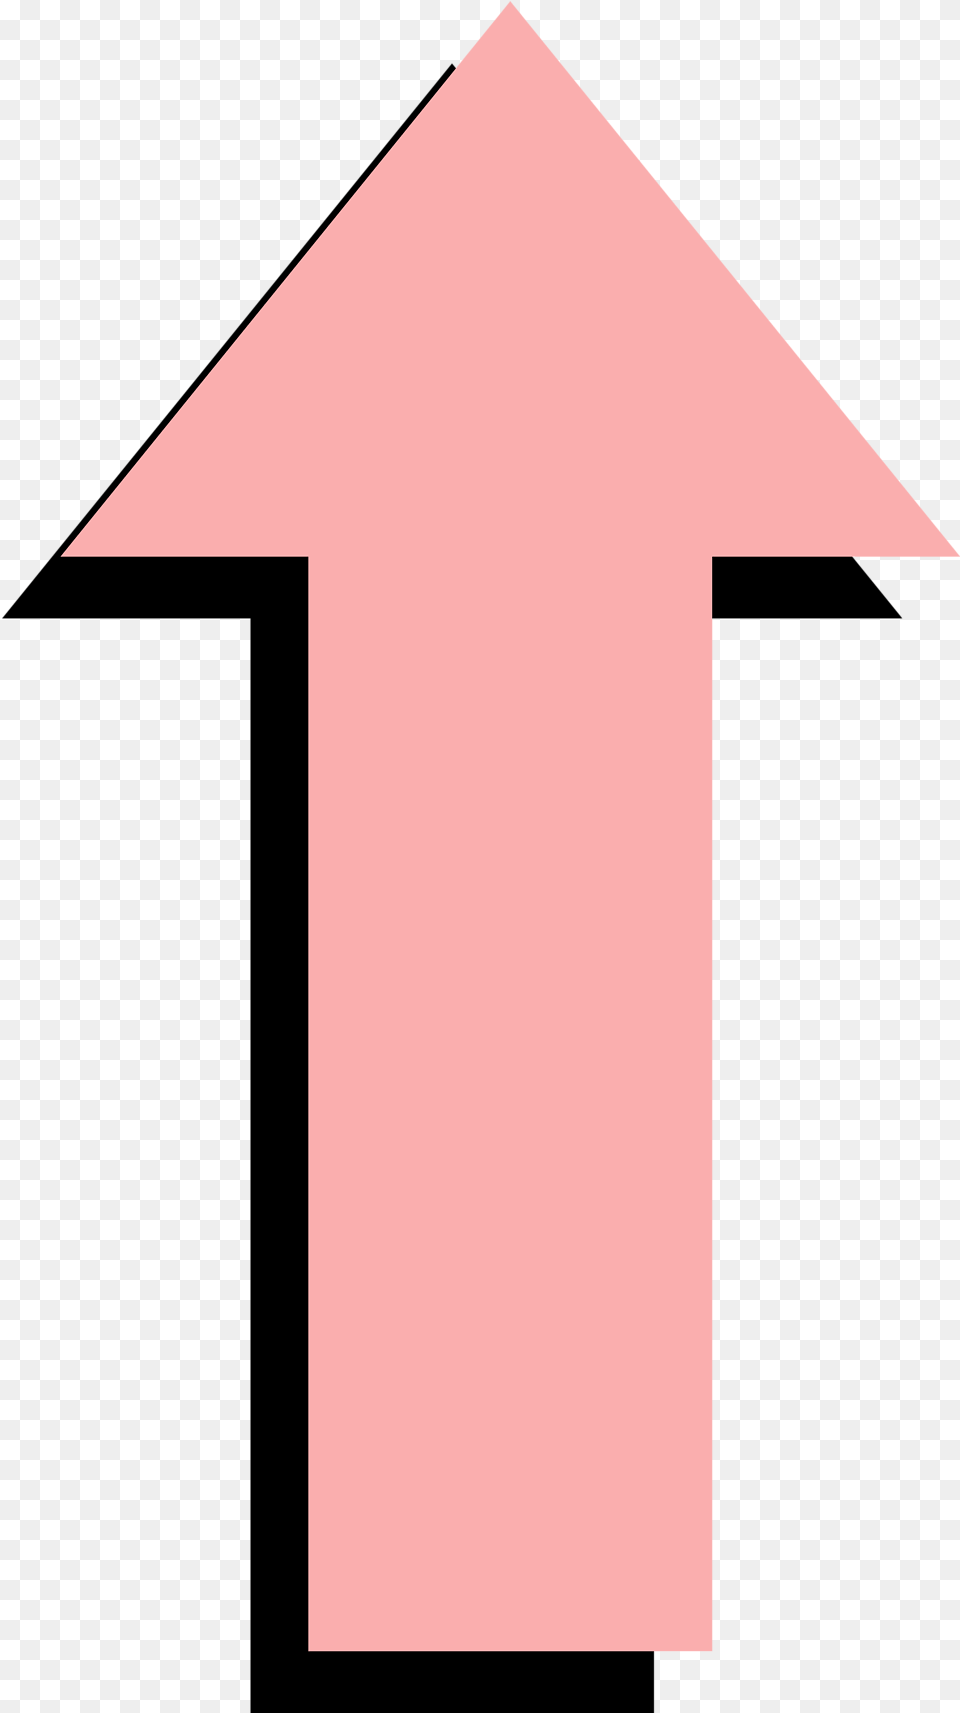 Download Arrow Red Free Stock Photo Pink Arrow Transparent Pink Arrow Pointing Up, Triangle, Cross, Symbol, Outdoors Png